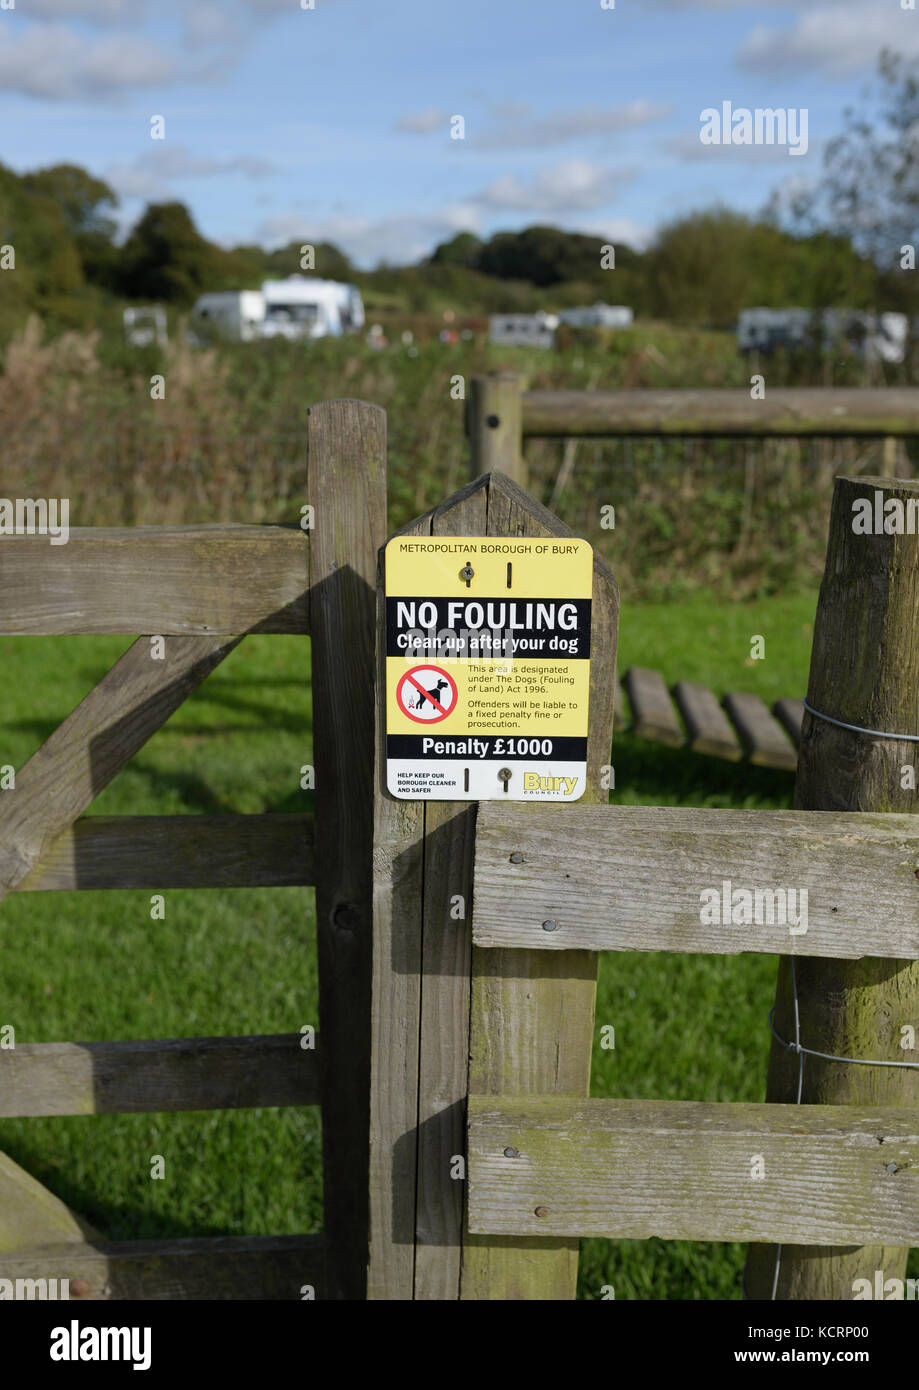 No fouling notice on wooden post in Burrs country park Bury lancashire uk Stock Photo